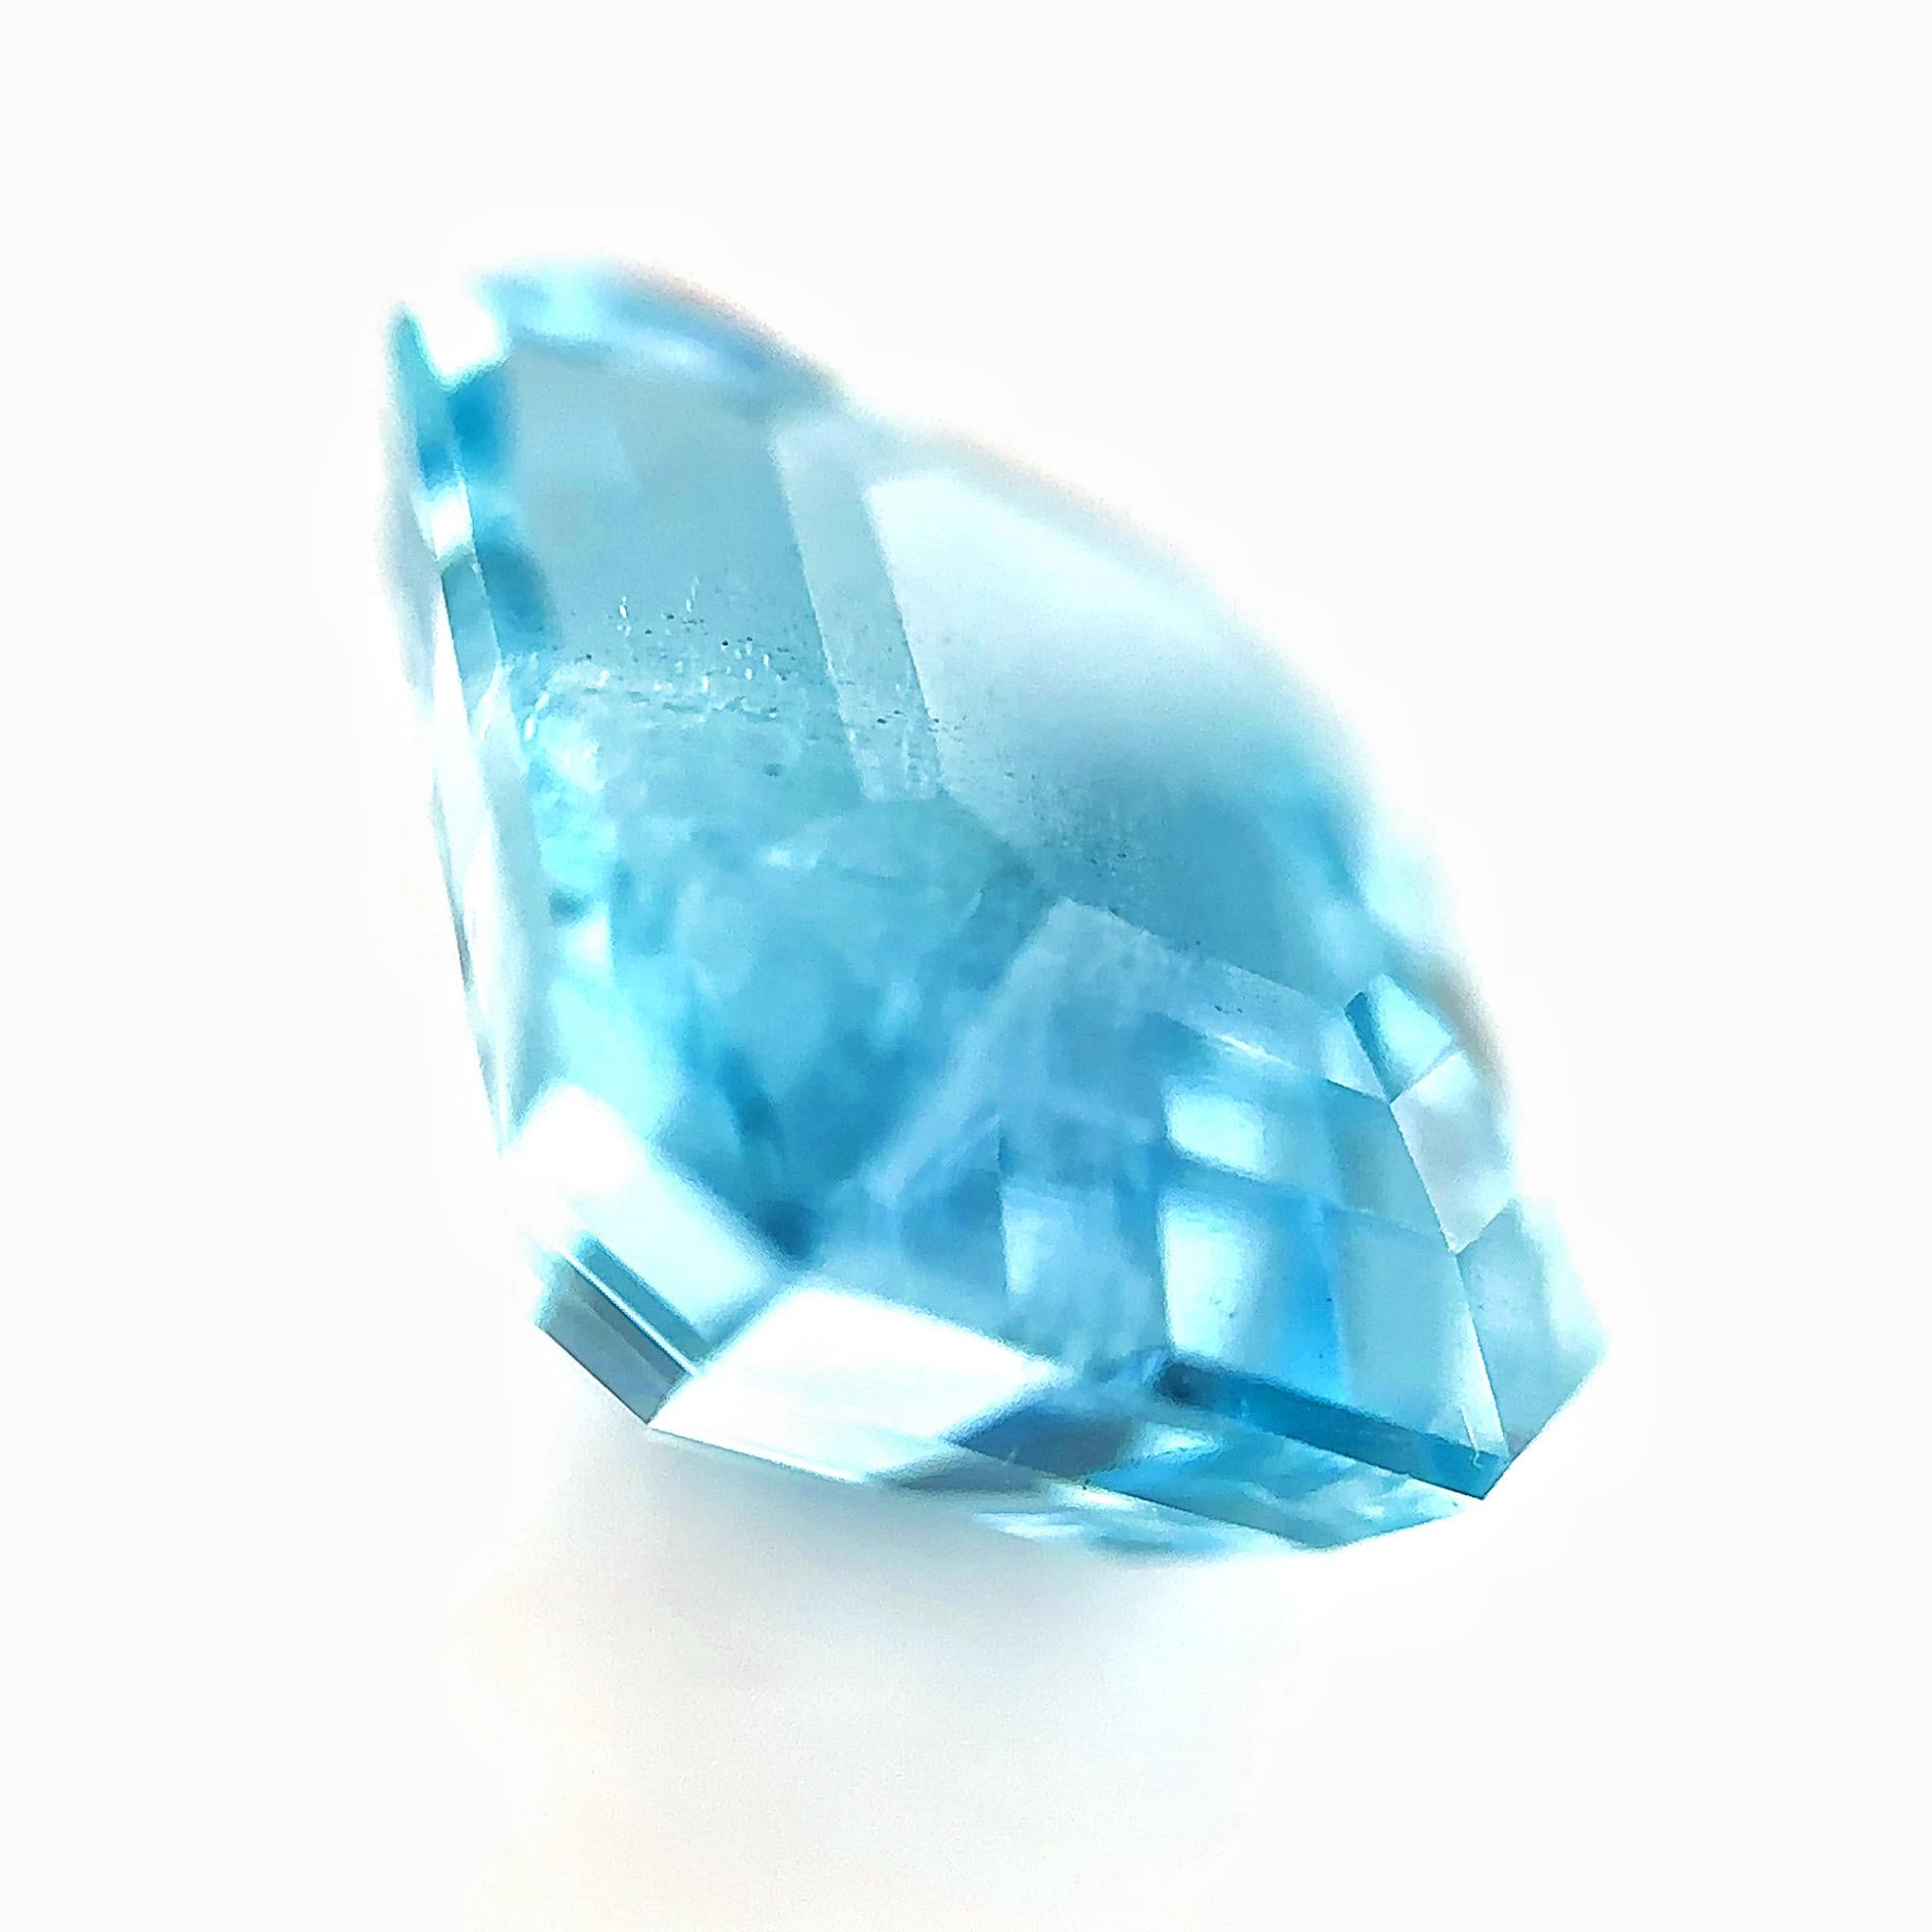 7.79 Carat Natural Santa Maria Color Aquamarine Loose Stone

Appointed lab certificate can be arranged upon request

This Item is ideal for your design as an engagement ring, cocktail ring, necklace, bracelet, etc.


ABOUT US

Xuelai Jewellery